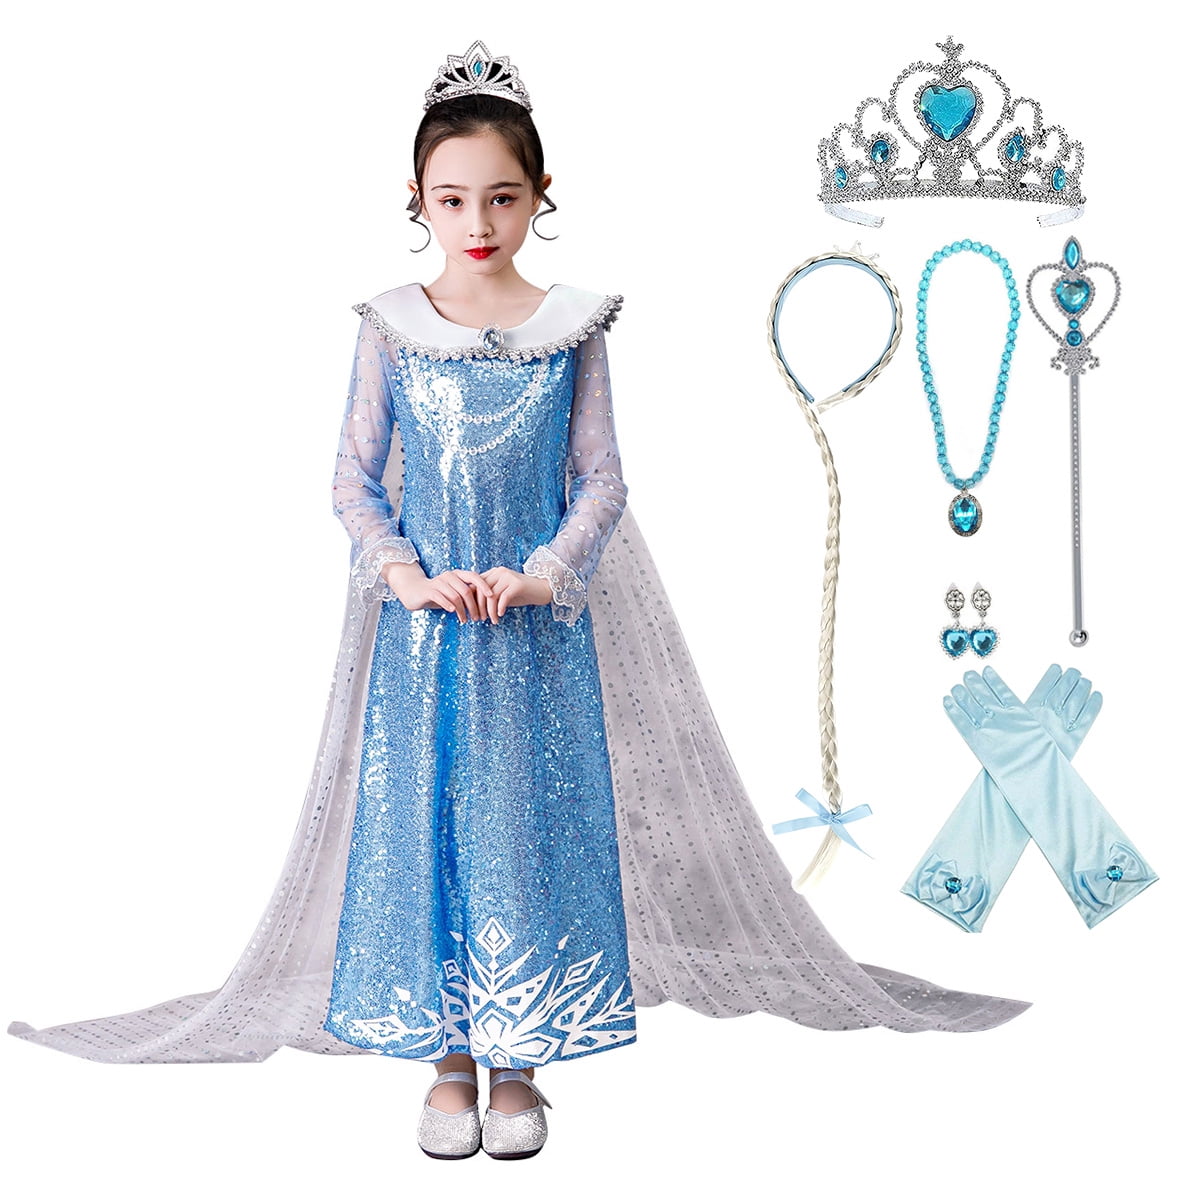 Dress for Girls – Princess Costume Kids Cosplay Costumes with Accessories - Walmart.com